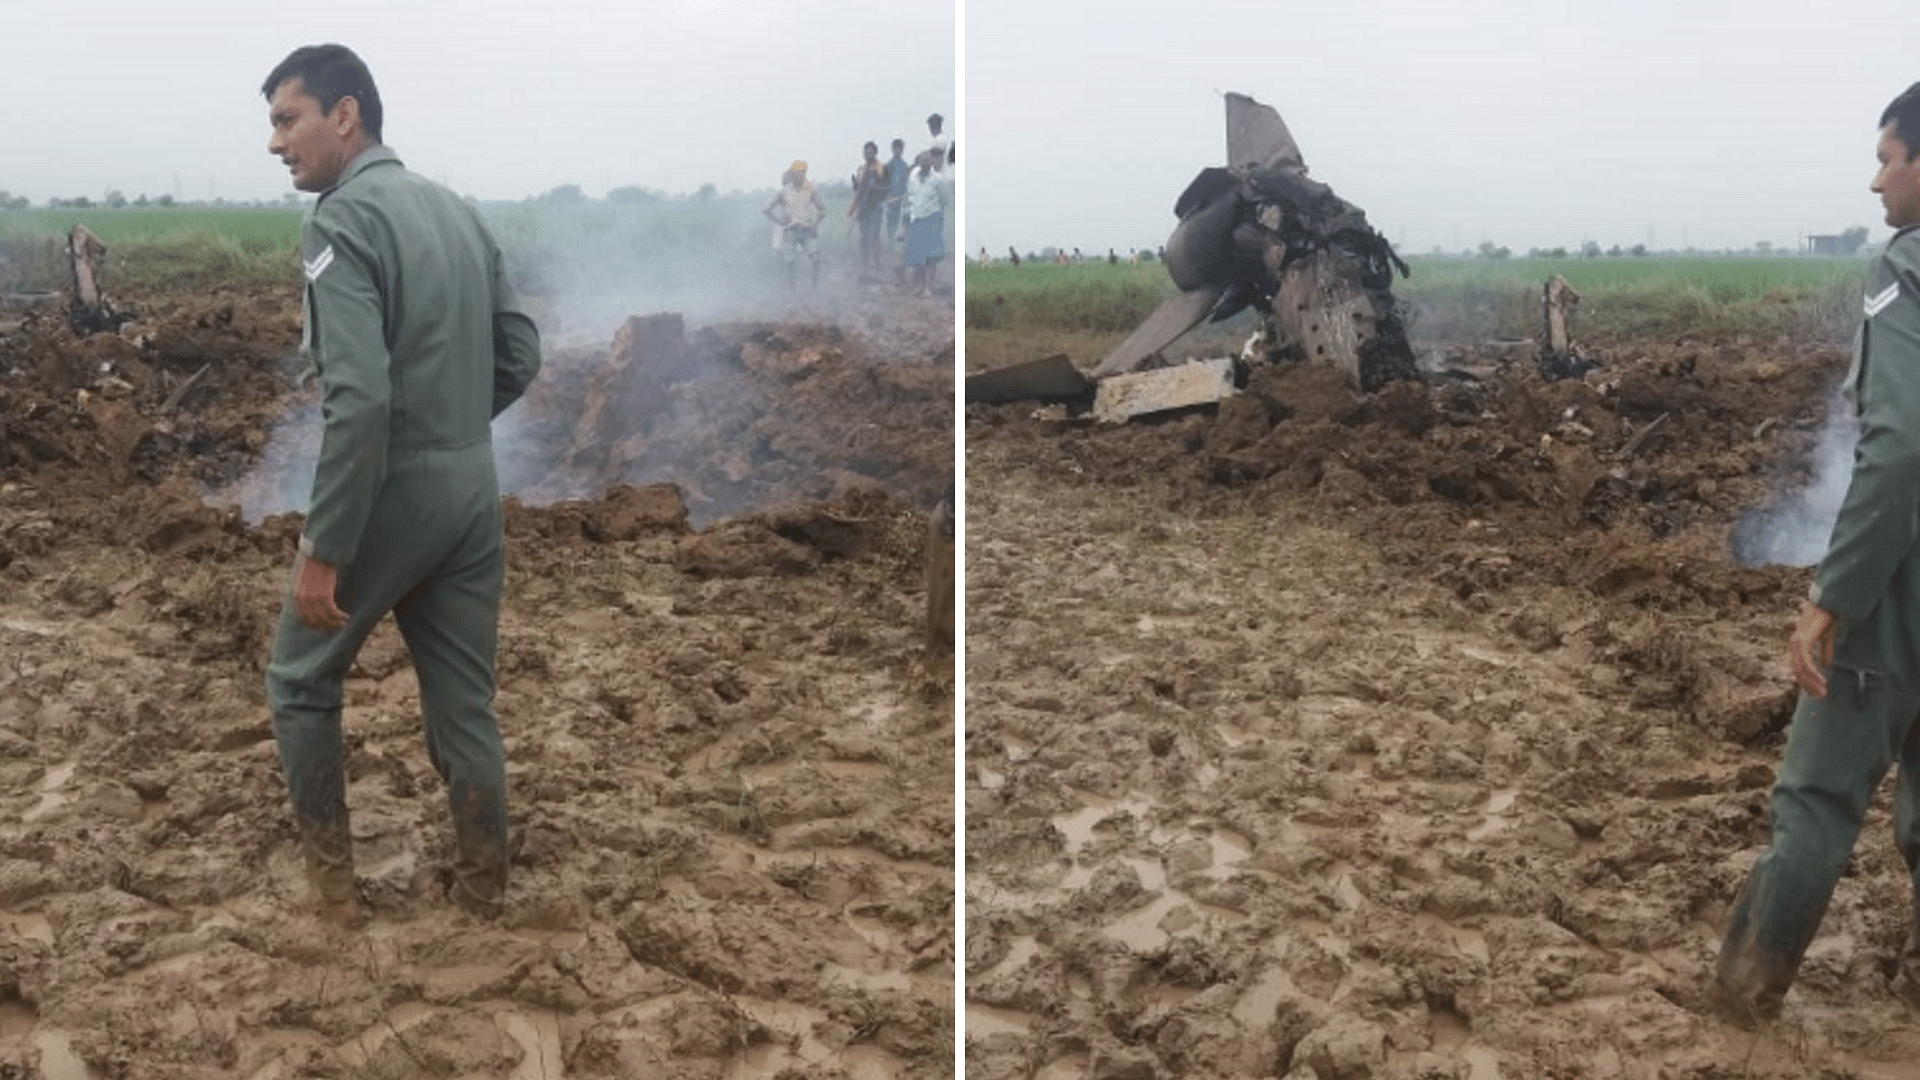 The aircraft was on a routine mission, and crashed around 10 am on Wednesday, 25 September.